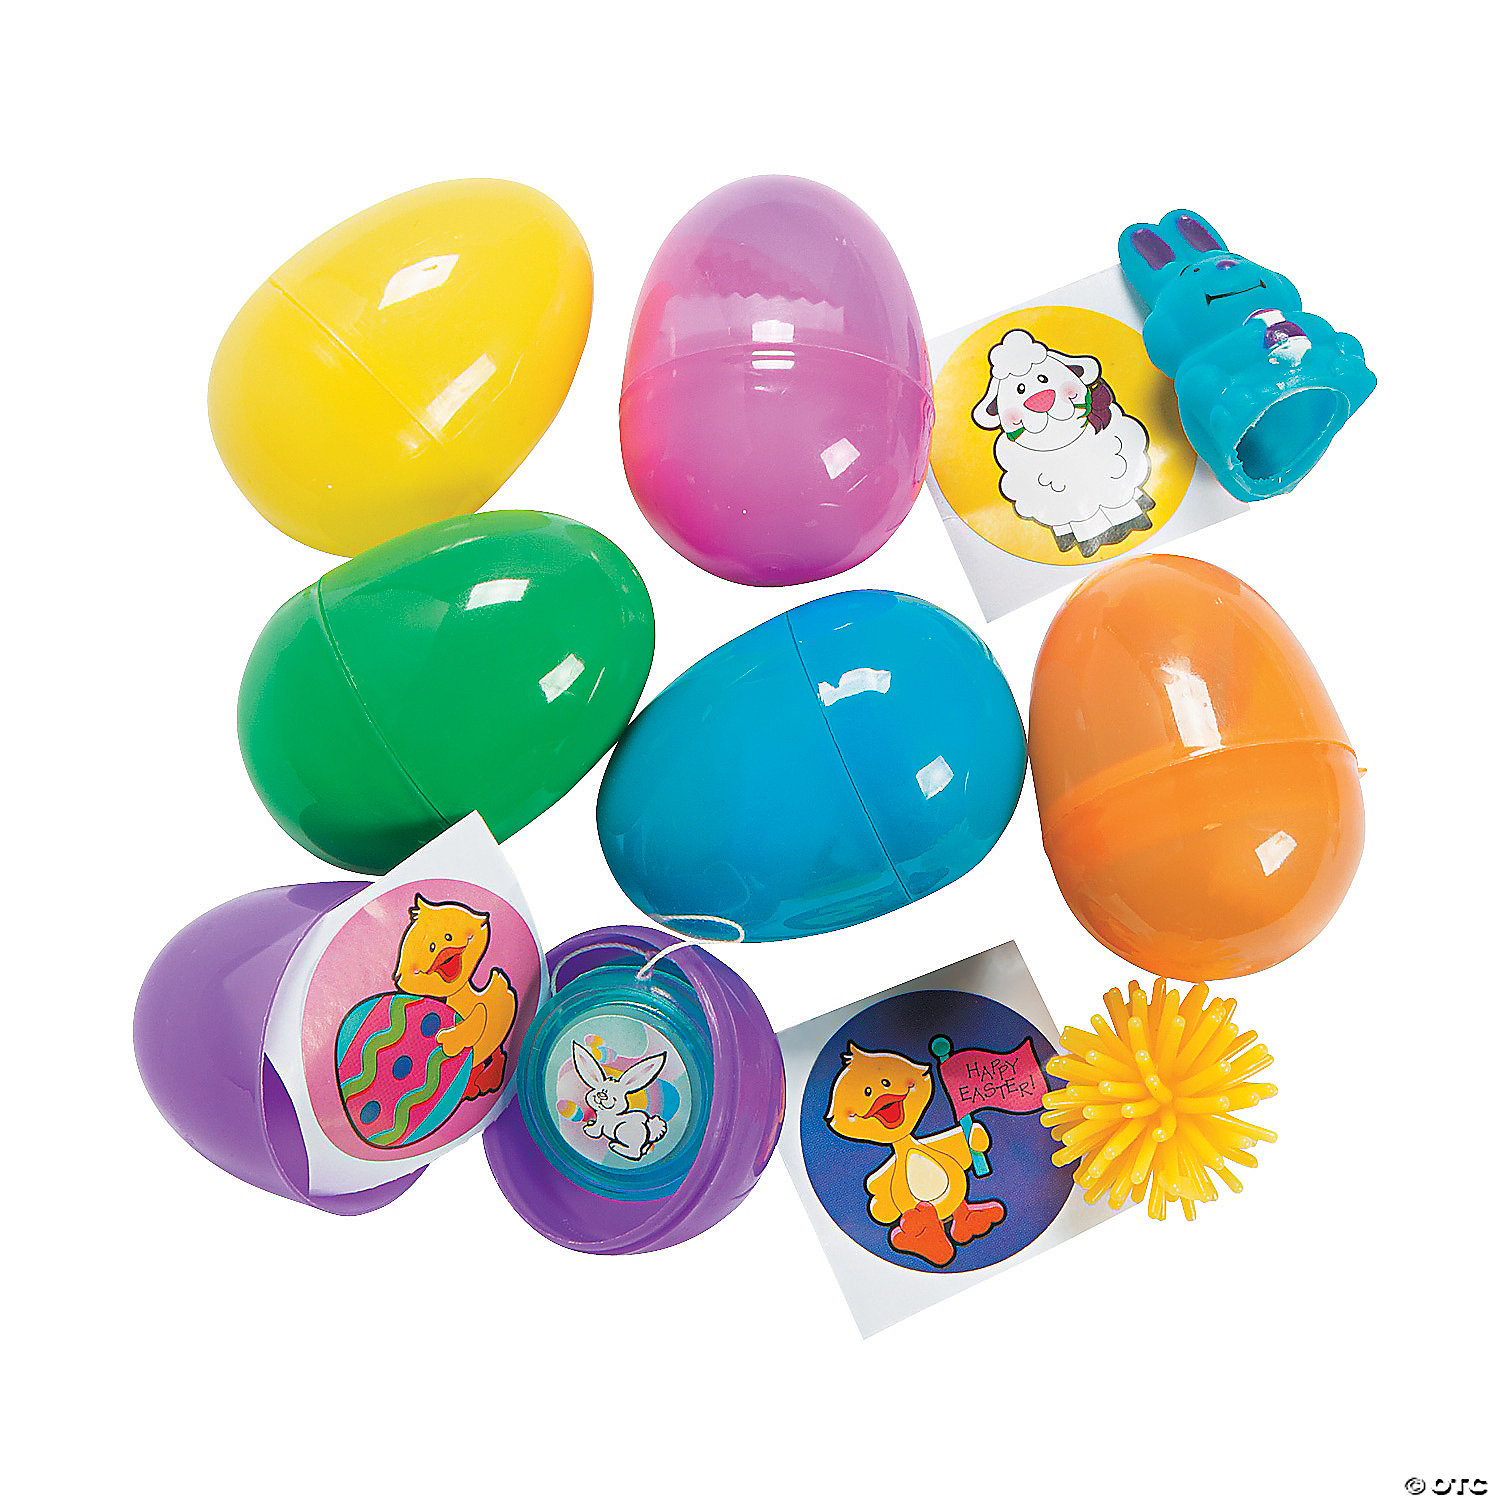 Each Perfect for Easter Egg Hunt Theme Party Favor Suitable for Kids Learning Educational Toys for Boys and Girls Easter Eggs Filled with 60 Pieces 2 3//8 Different Kinds of Surprise Plastic Eggs with Toys Inside